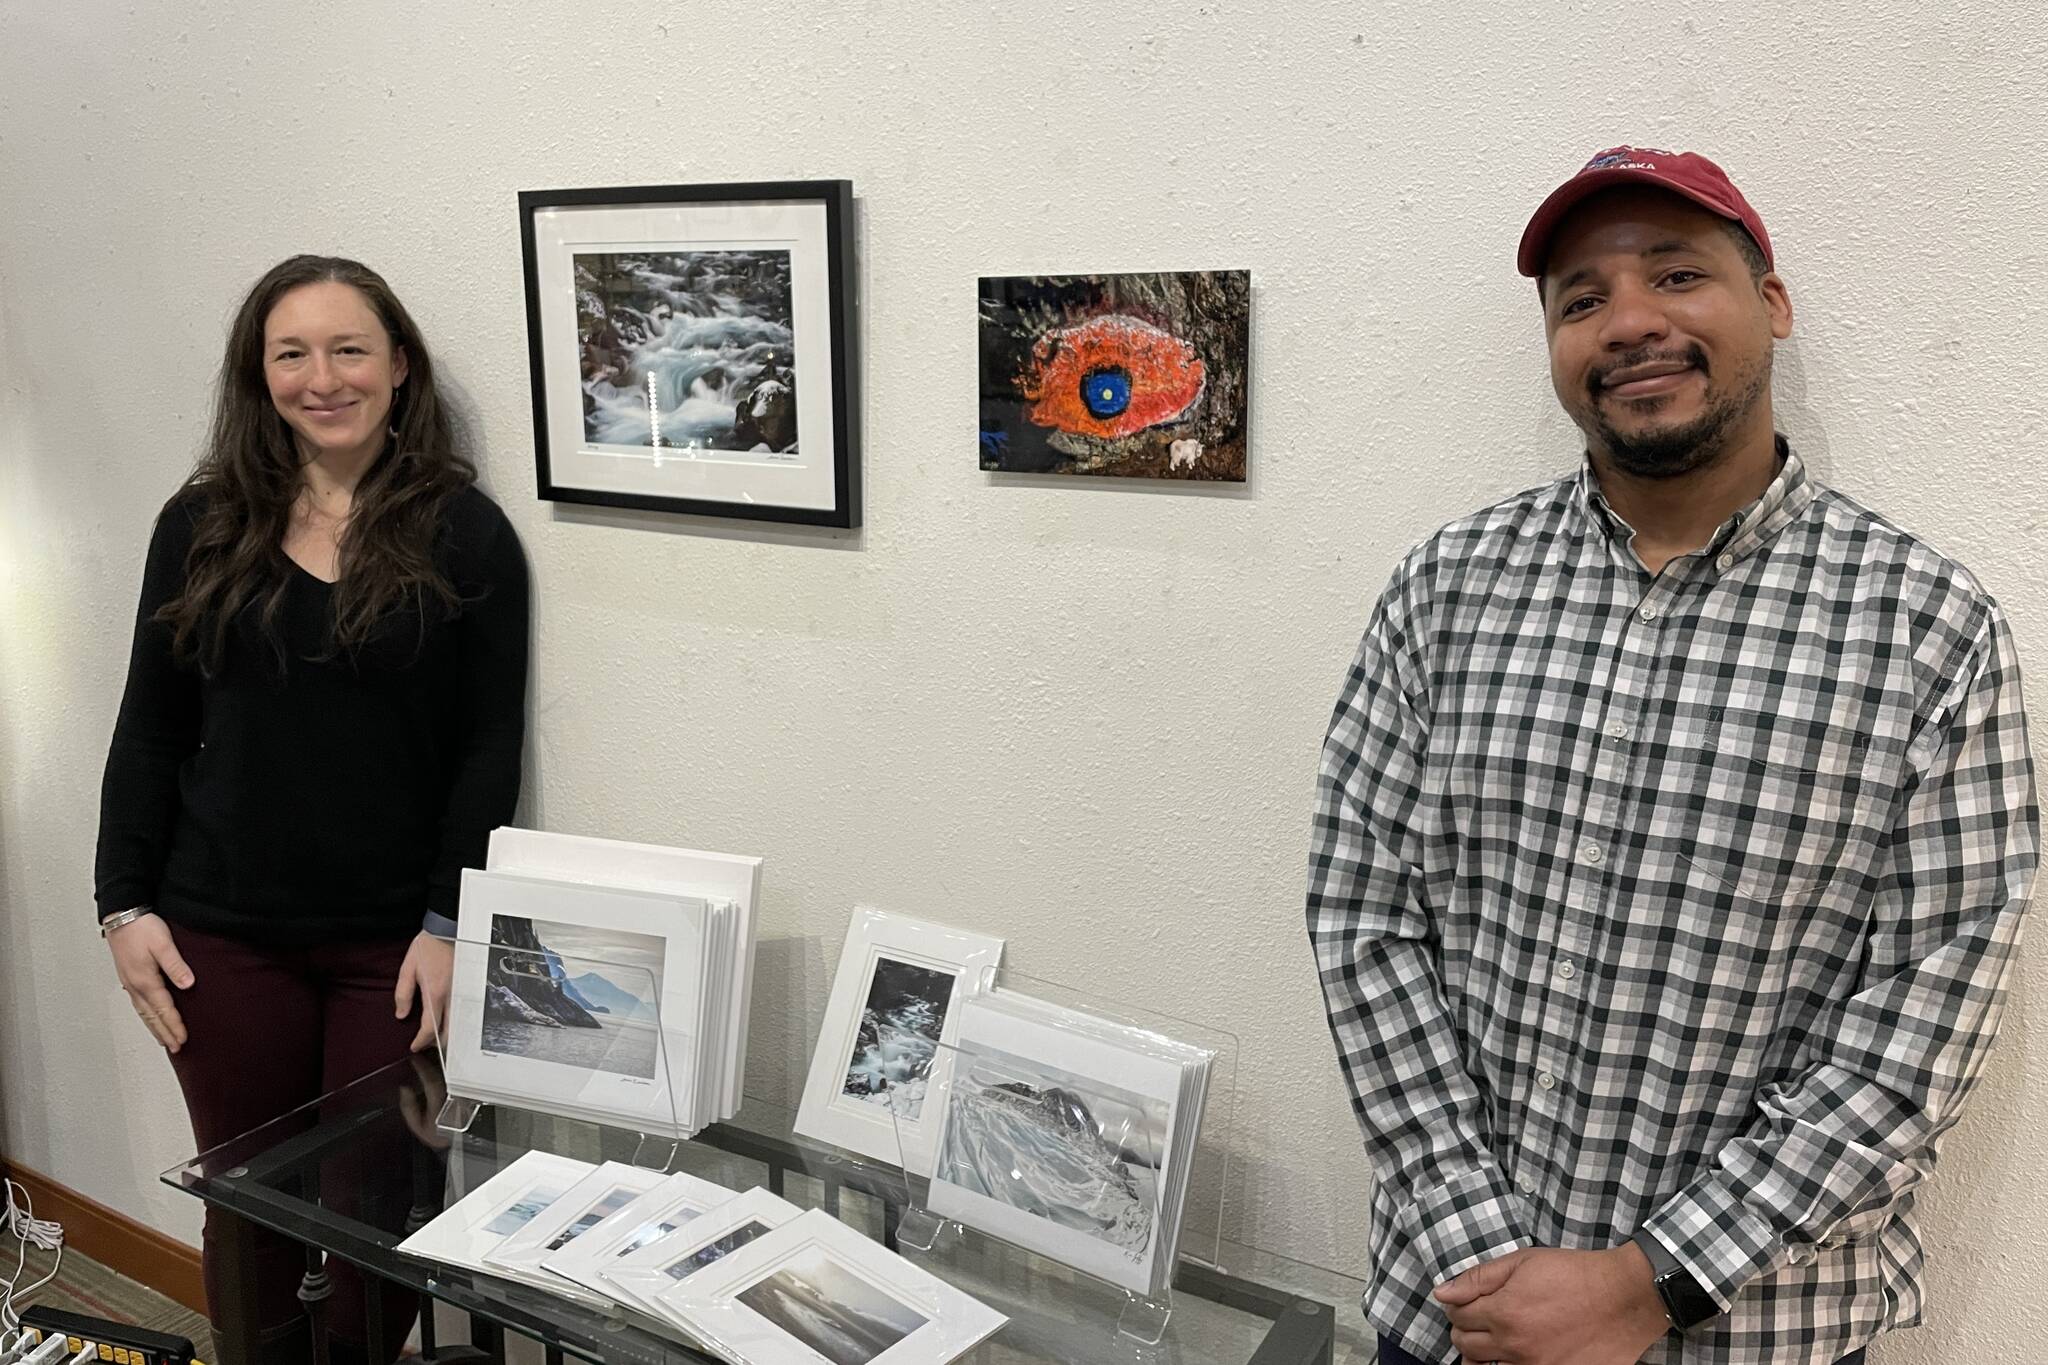 Michael S. Lockett / Capital City Weekly
Sarah Davidson and Kevin Jeffrey, Annie Kaill’s featured artists for the March 2022 First Friday, stand by a display of their work at the store on Wednesday.